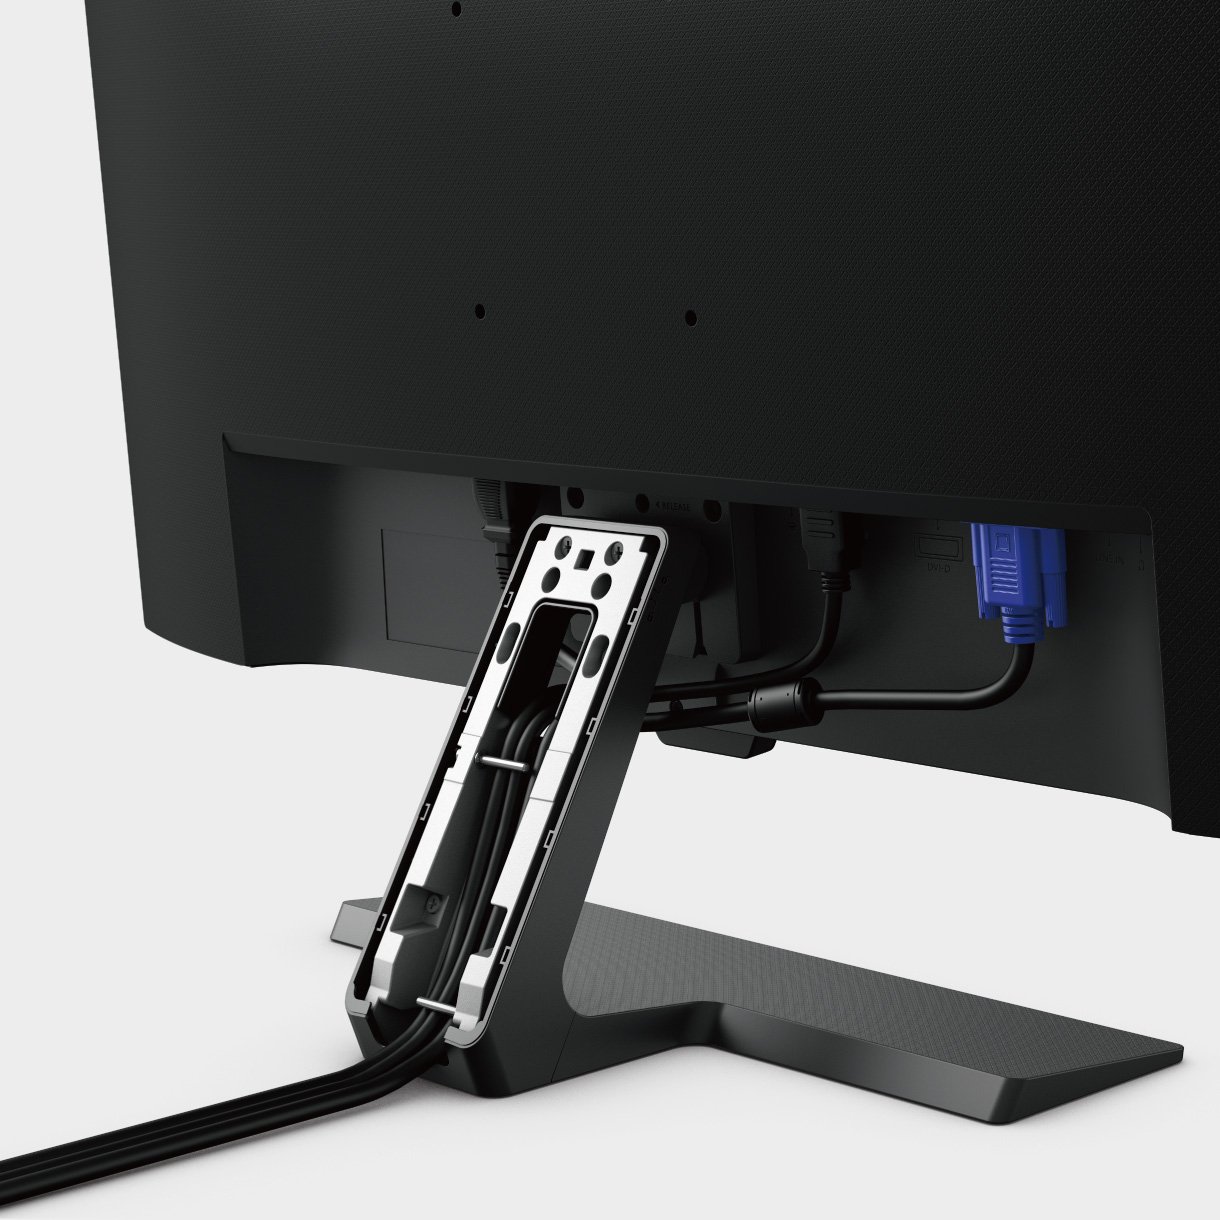 benq gw2780 with invisible cable management system hides all wires inside the monitor stand for cleanest look